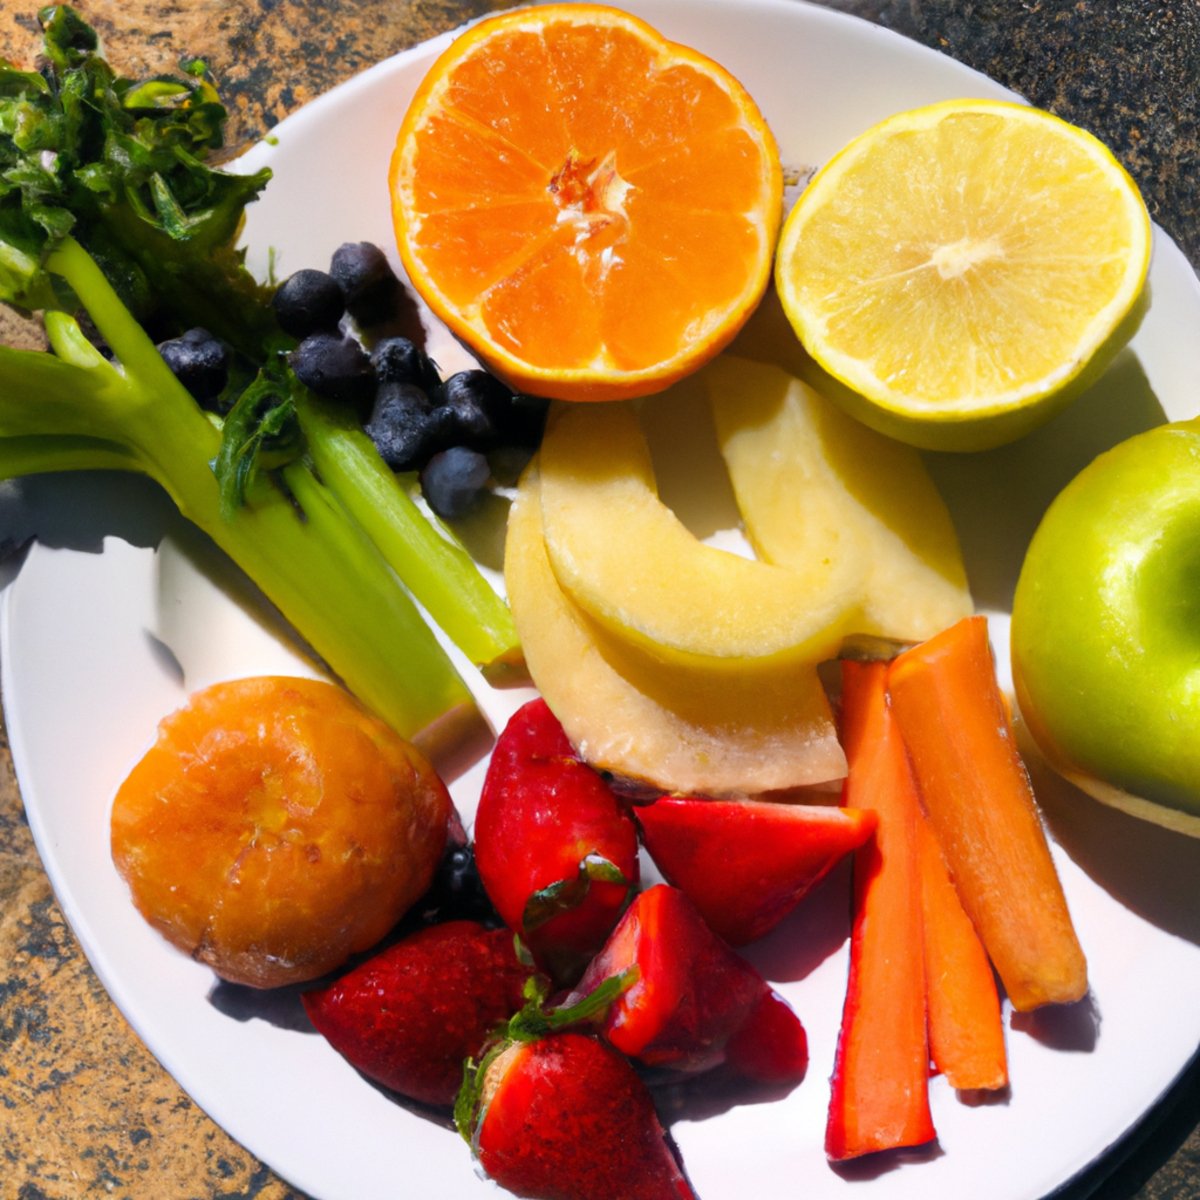 Colorful fruits and vegetables on a platter, promoting a balanced diet for managing Alkaptonuria.